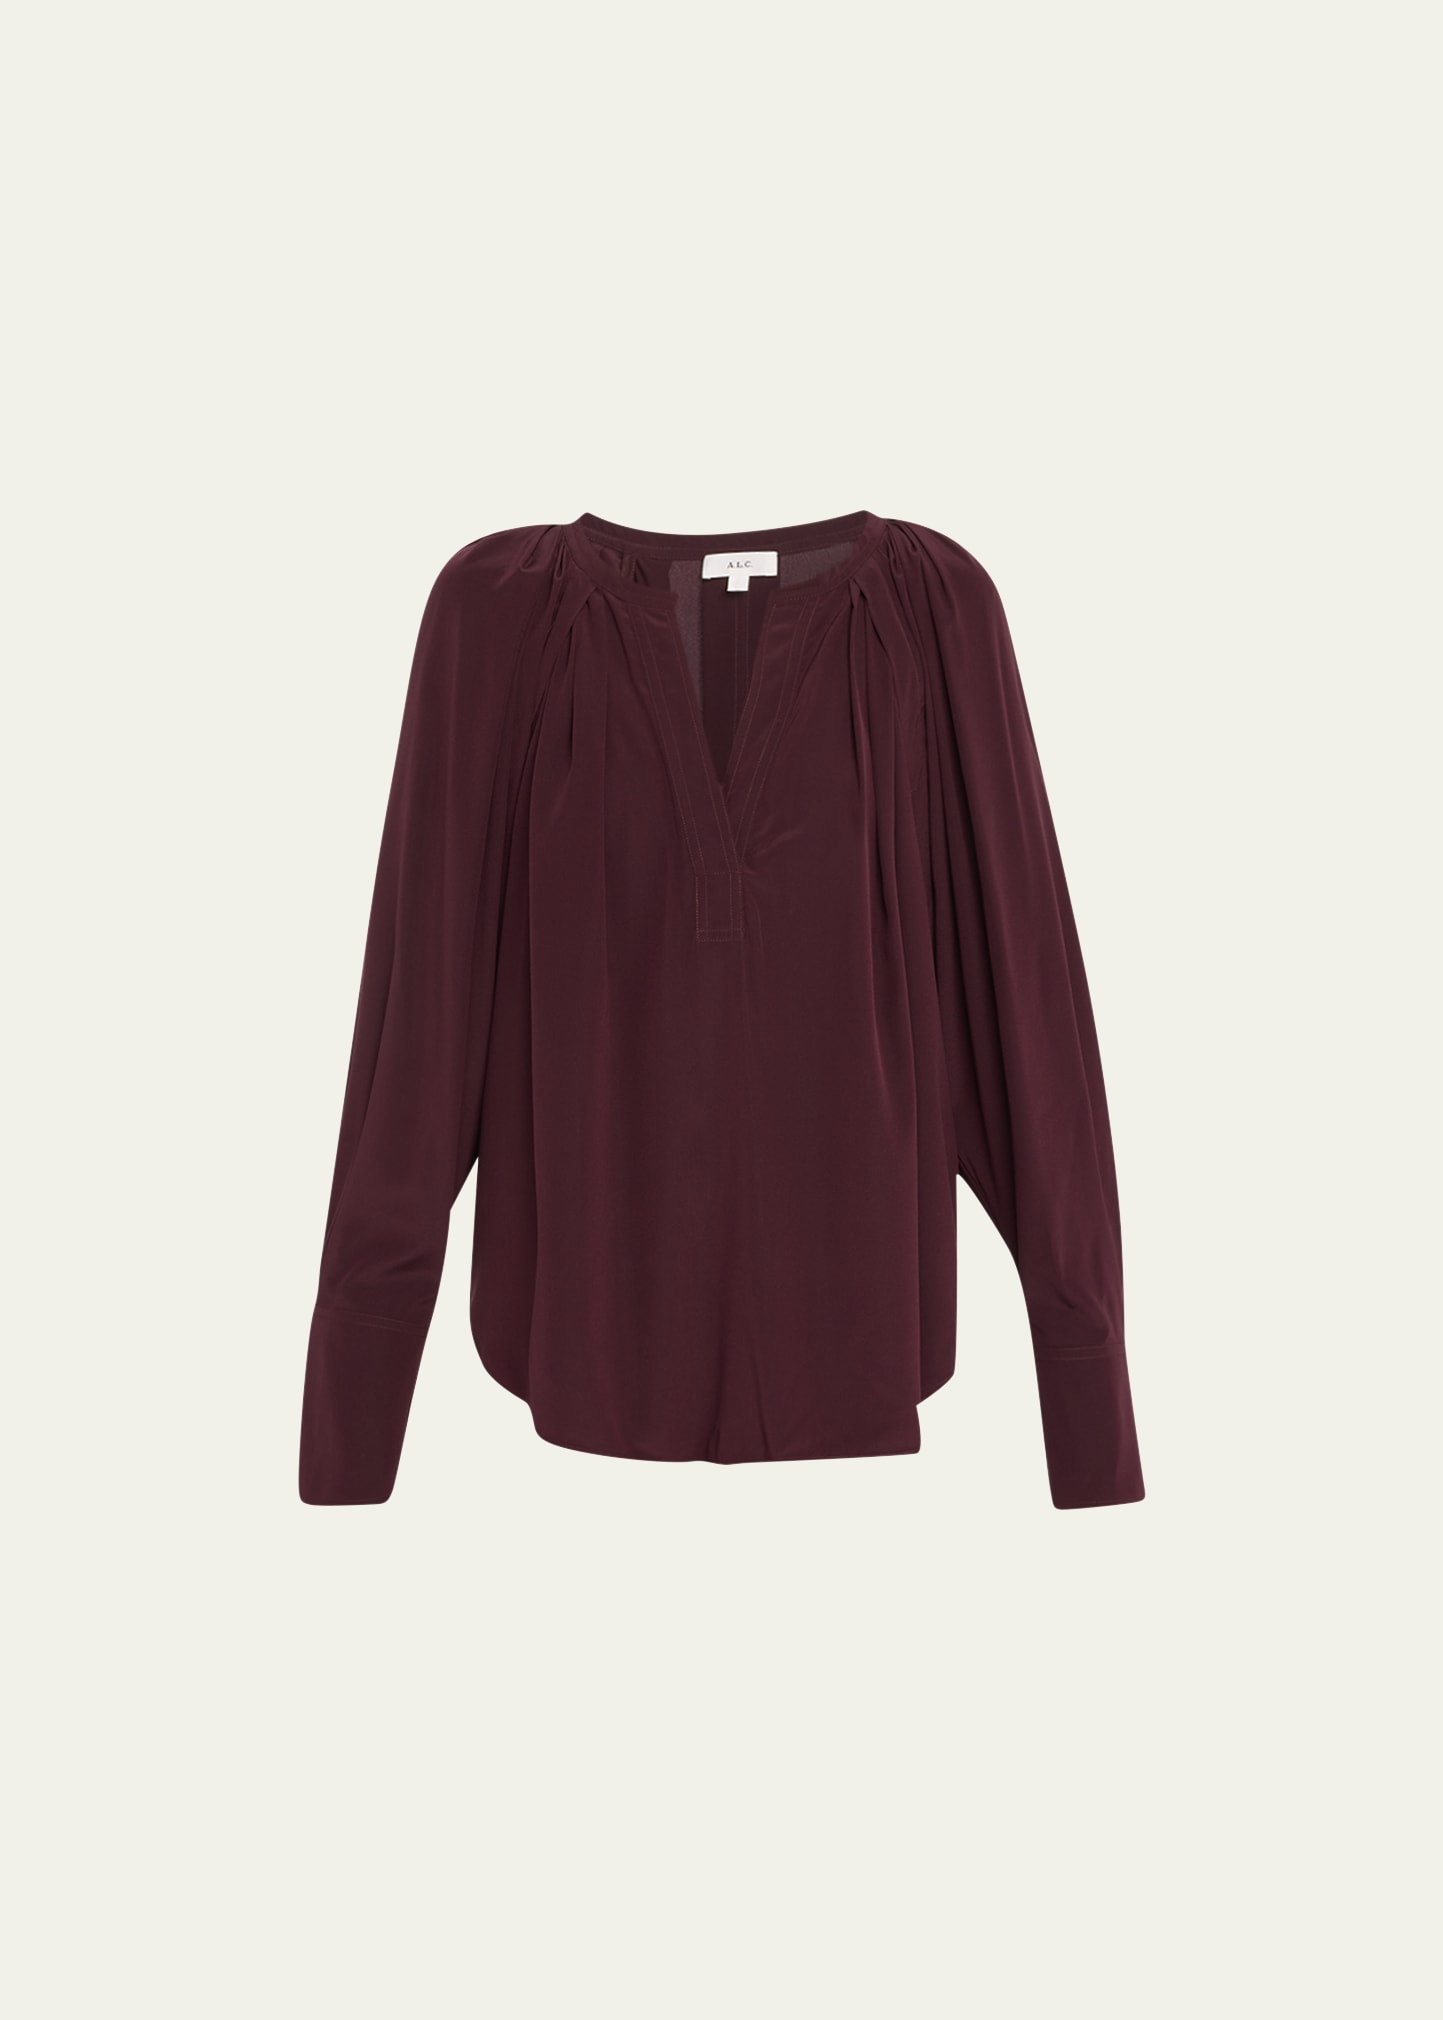 Lucky Brand Burgundy Long Sleeve Top Size L - 71% off